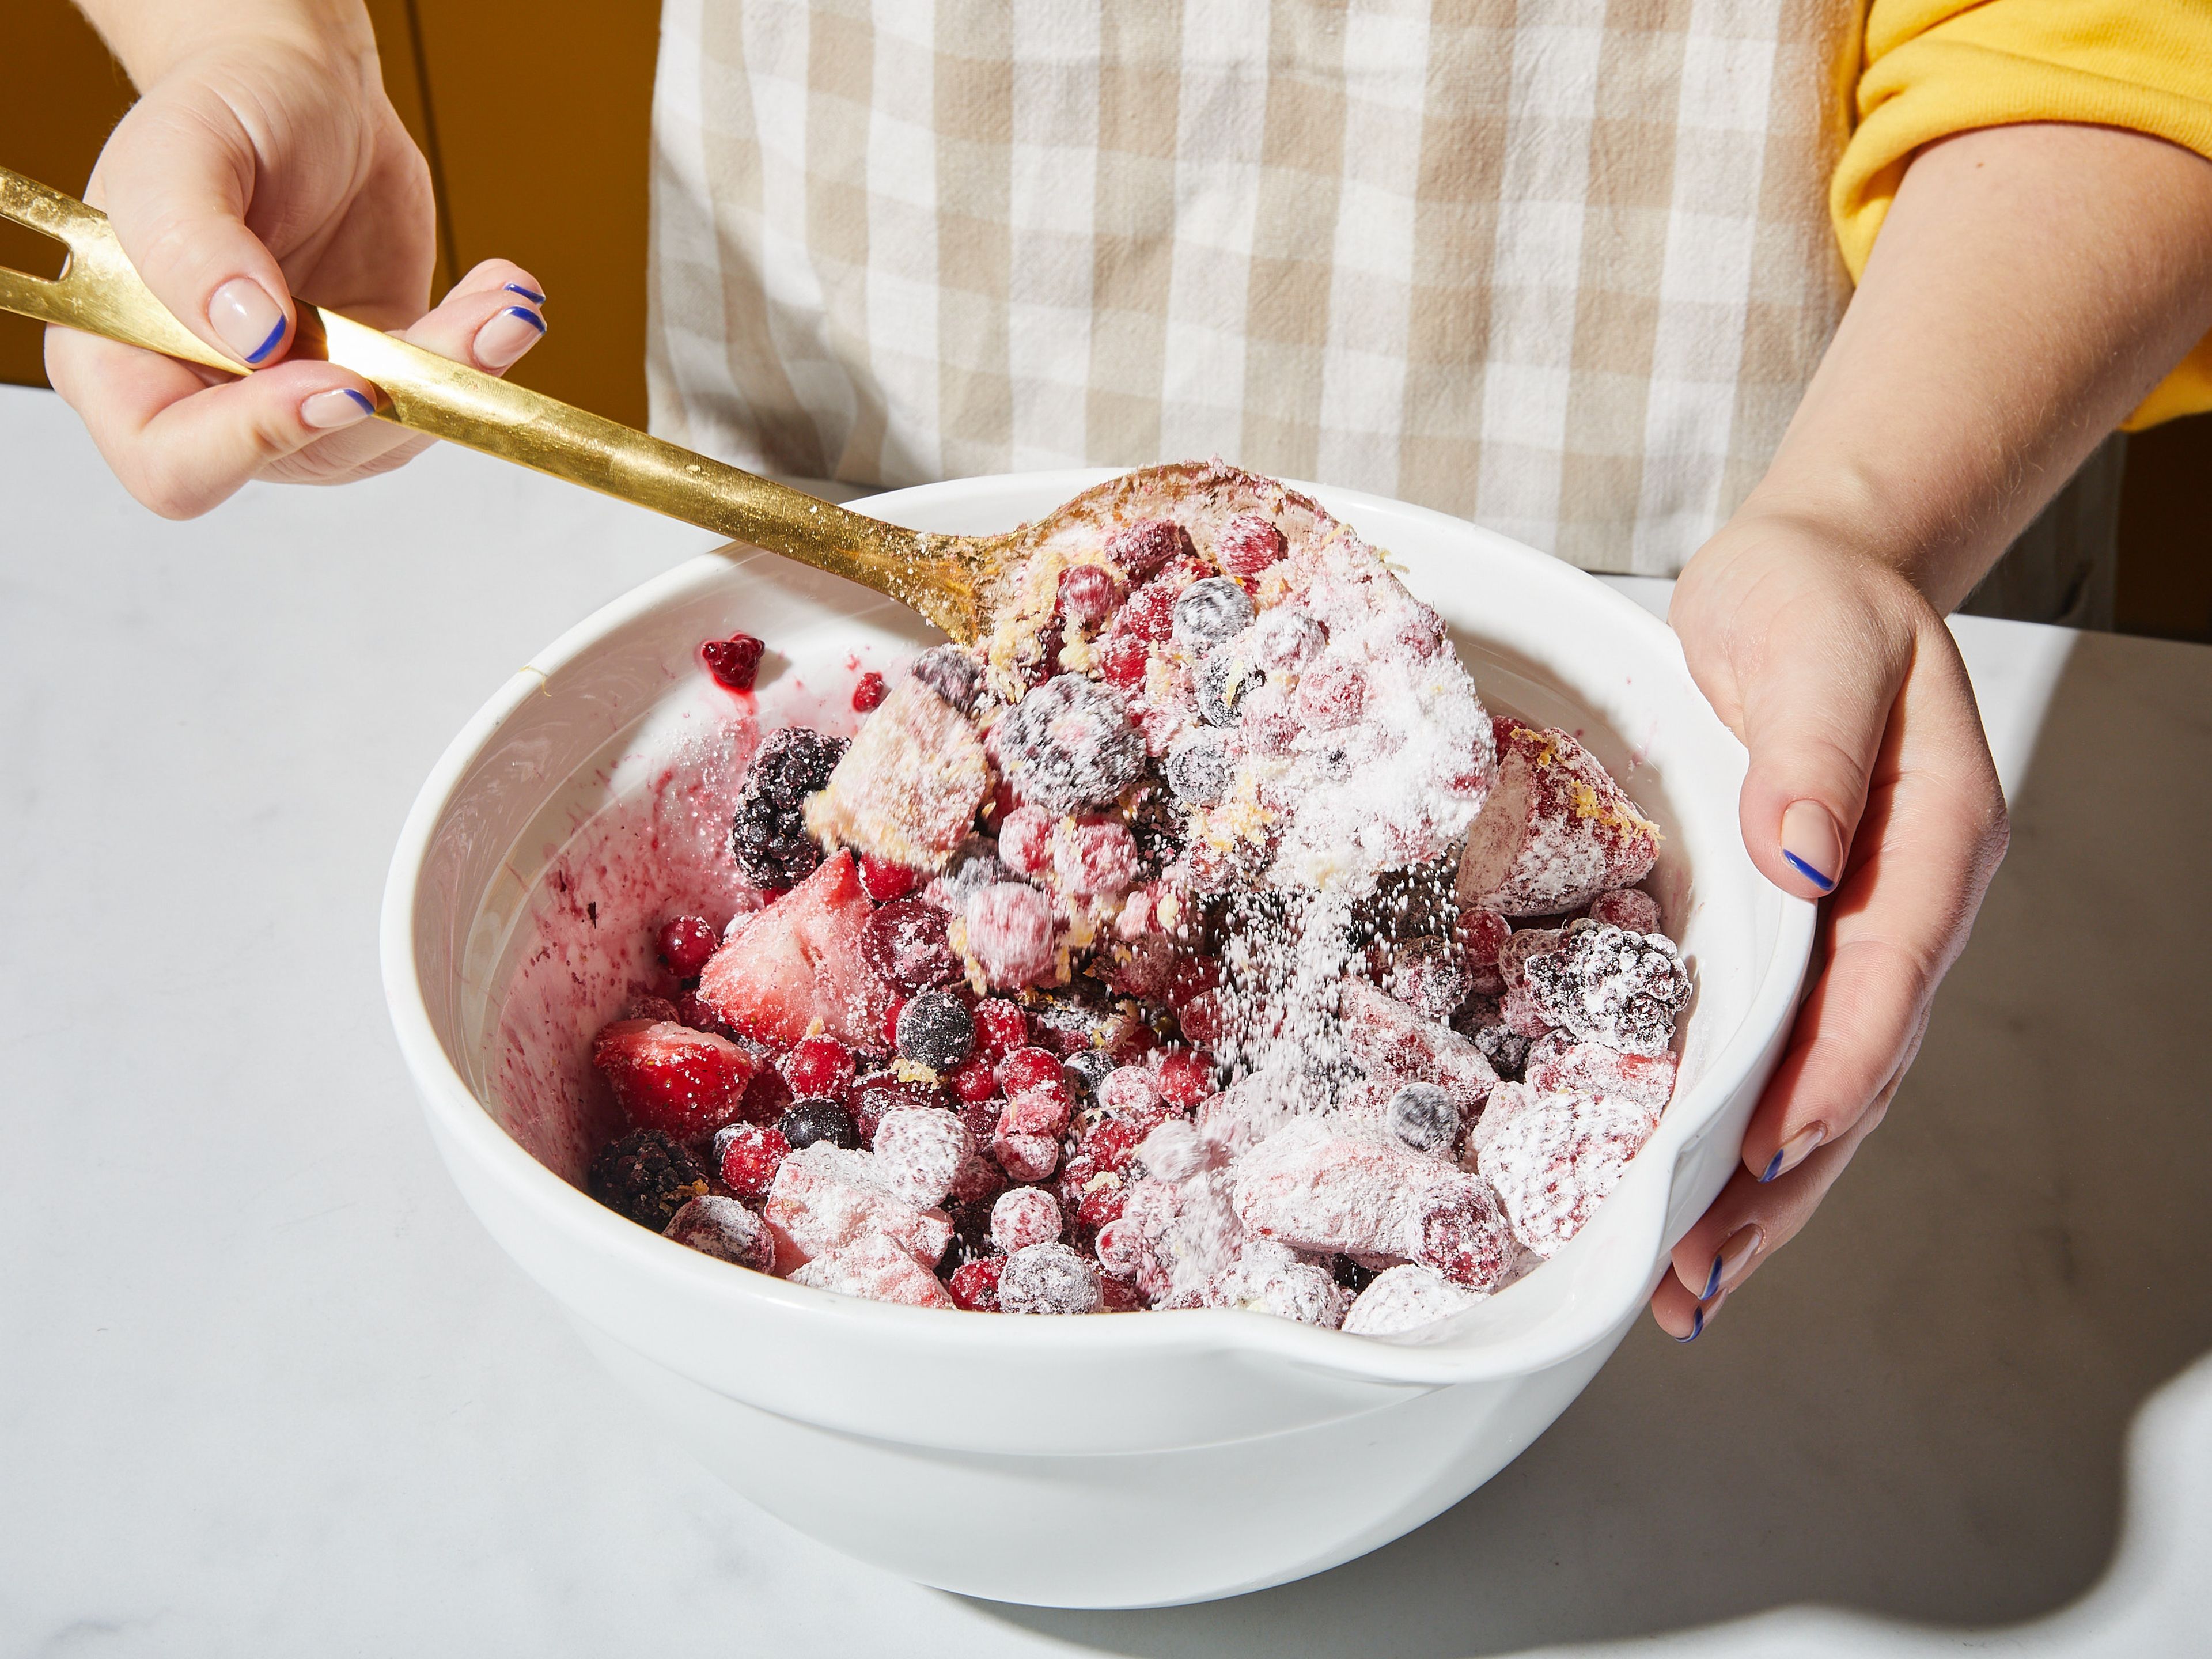 Preheat the oven to 190°C/375°F top/bottom heat. Toss frozen berries in a large bowl with sugar, starch, salt, and vanilla bean paste. Zest lemon over the mixture and toss once more. Mix raw sugar with cardamom and set aside. Crack egg into a small bowl, whisk, and set aside.